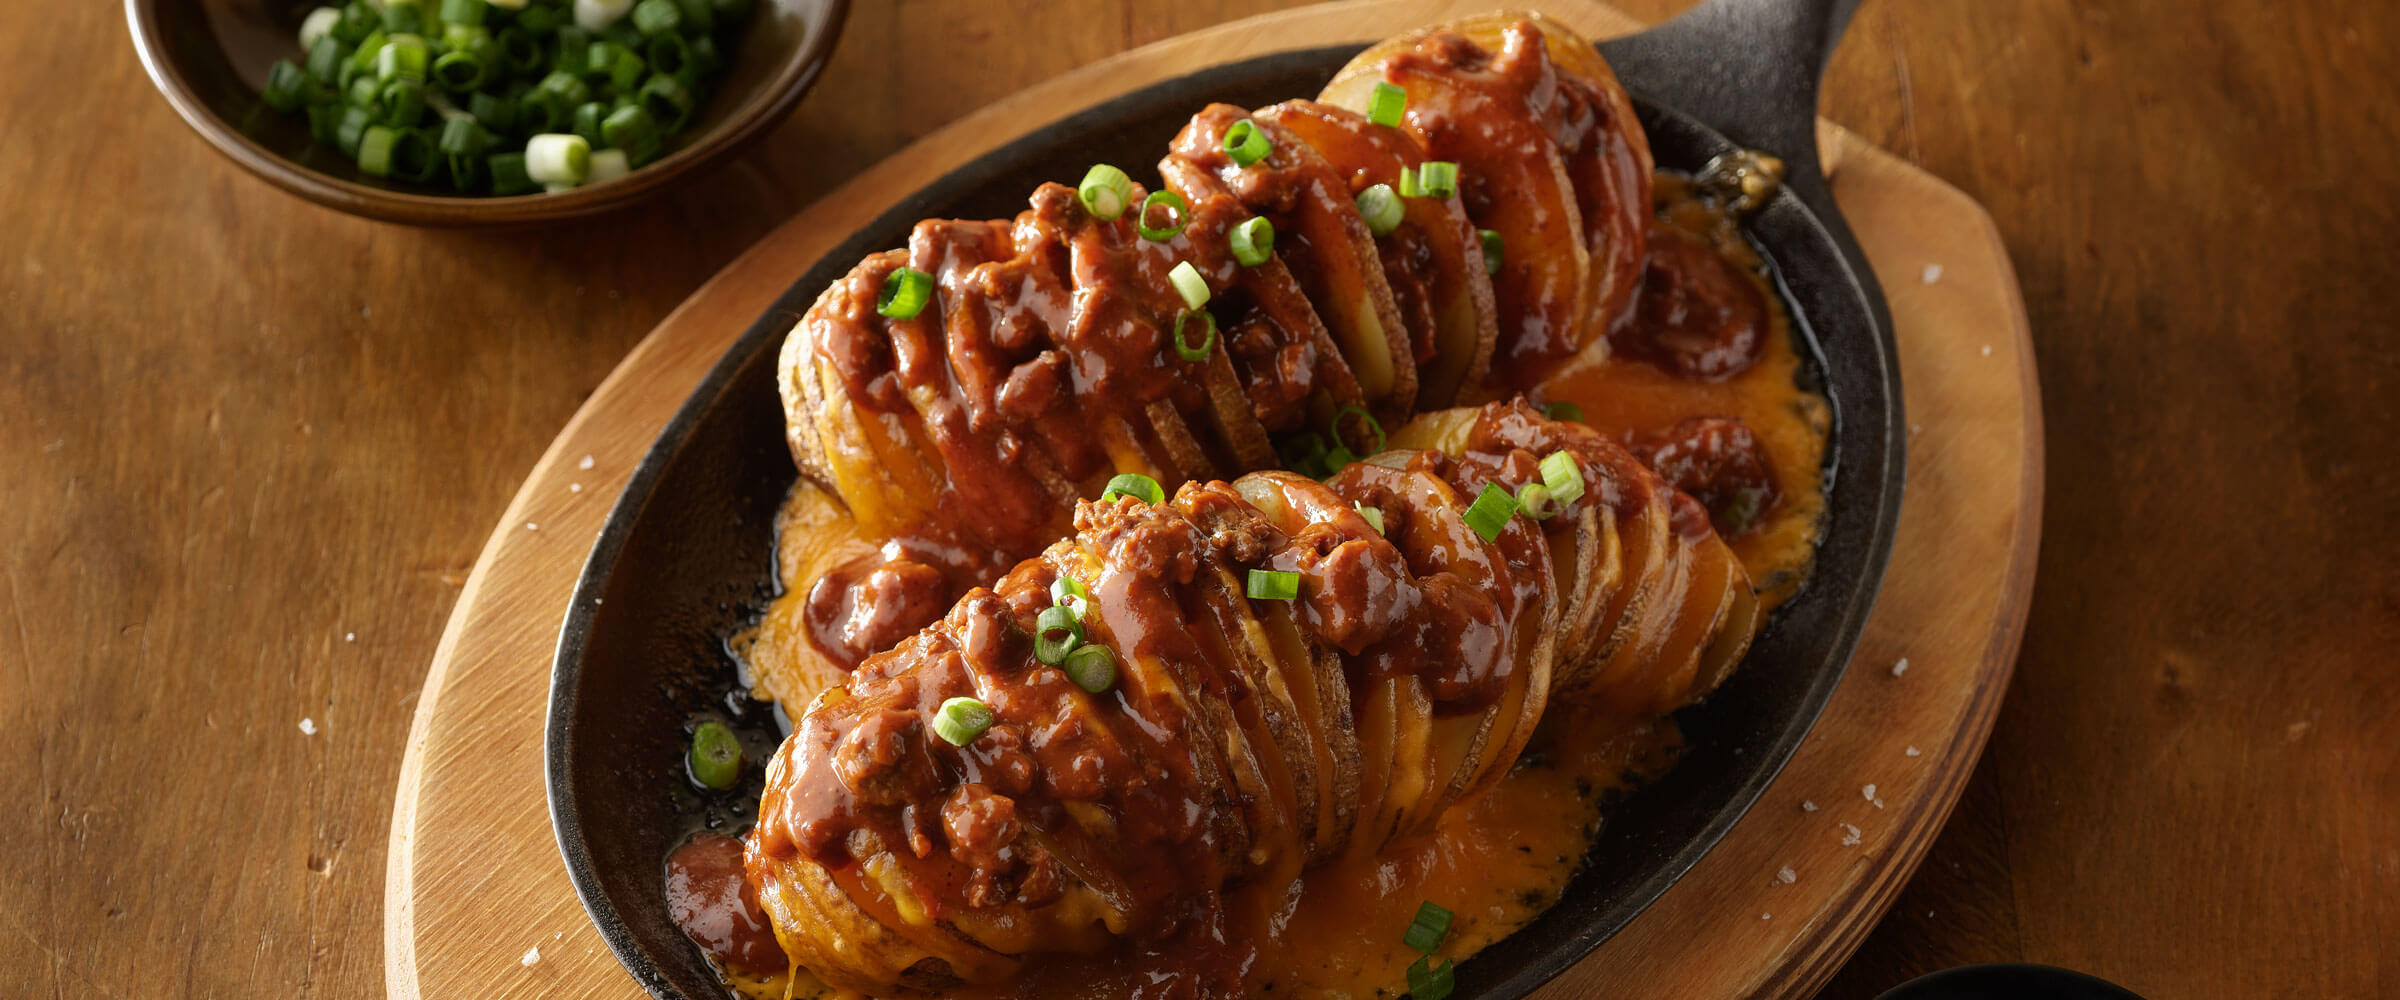 Chili Cheese Hasselback Potatoes in cast iron skilled topped with green onions